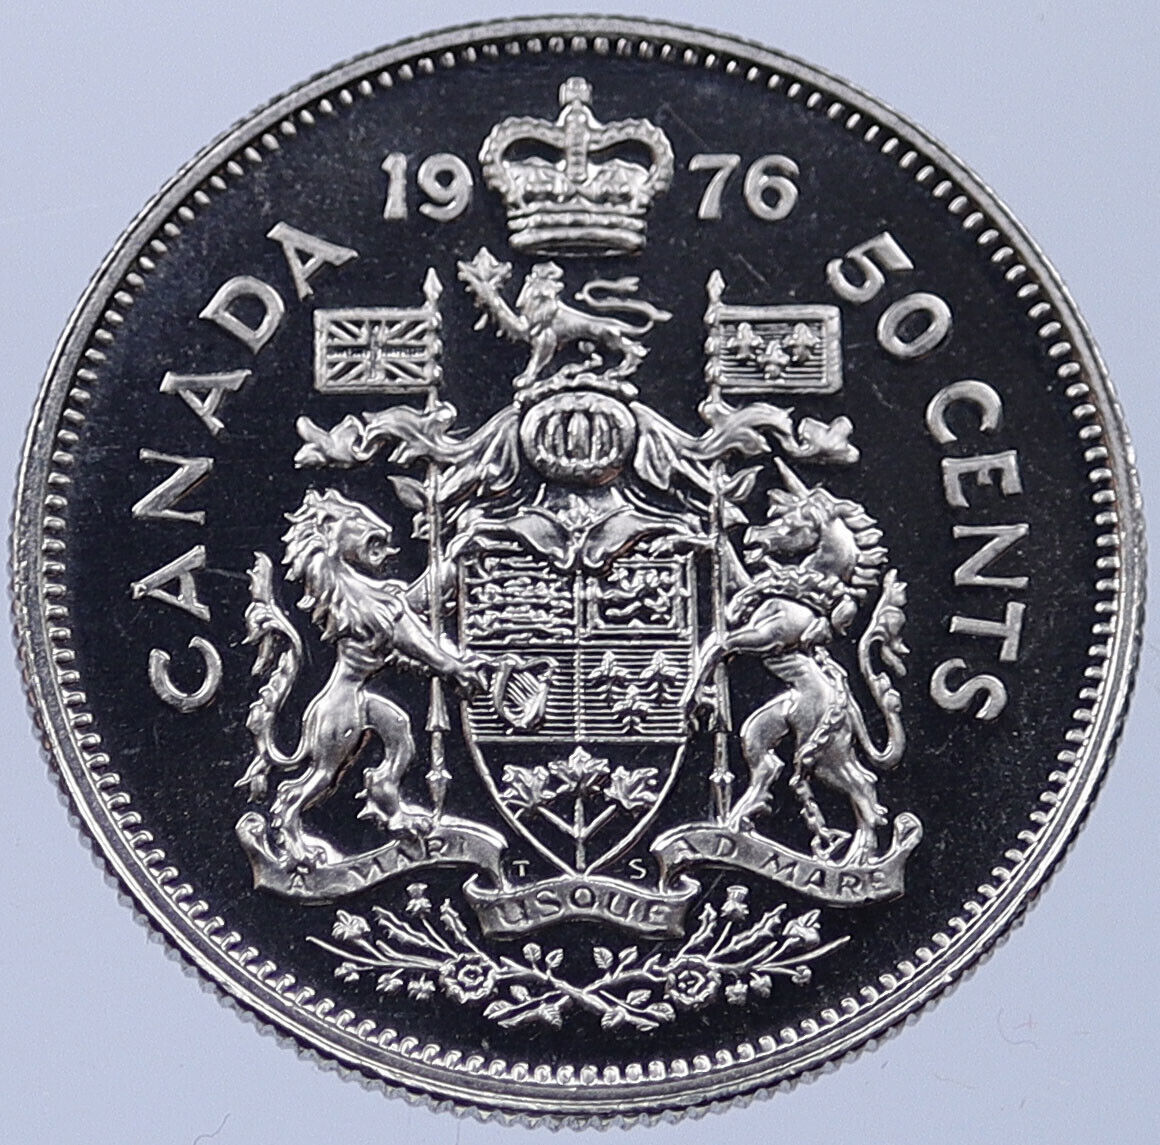 1976 CANADA under UK Queen ELIZABETH II Proof Like 50 CENTS Coin i119004